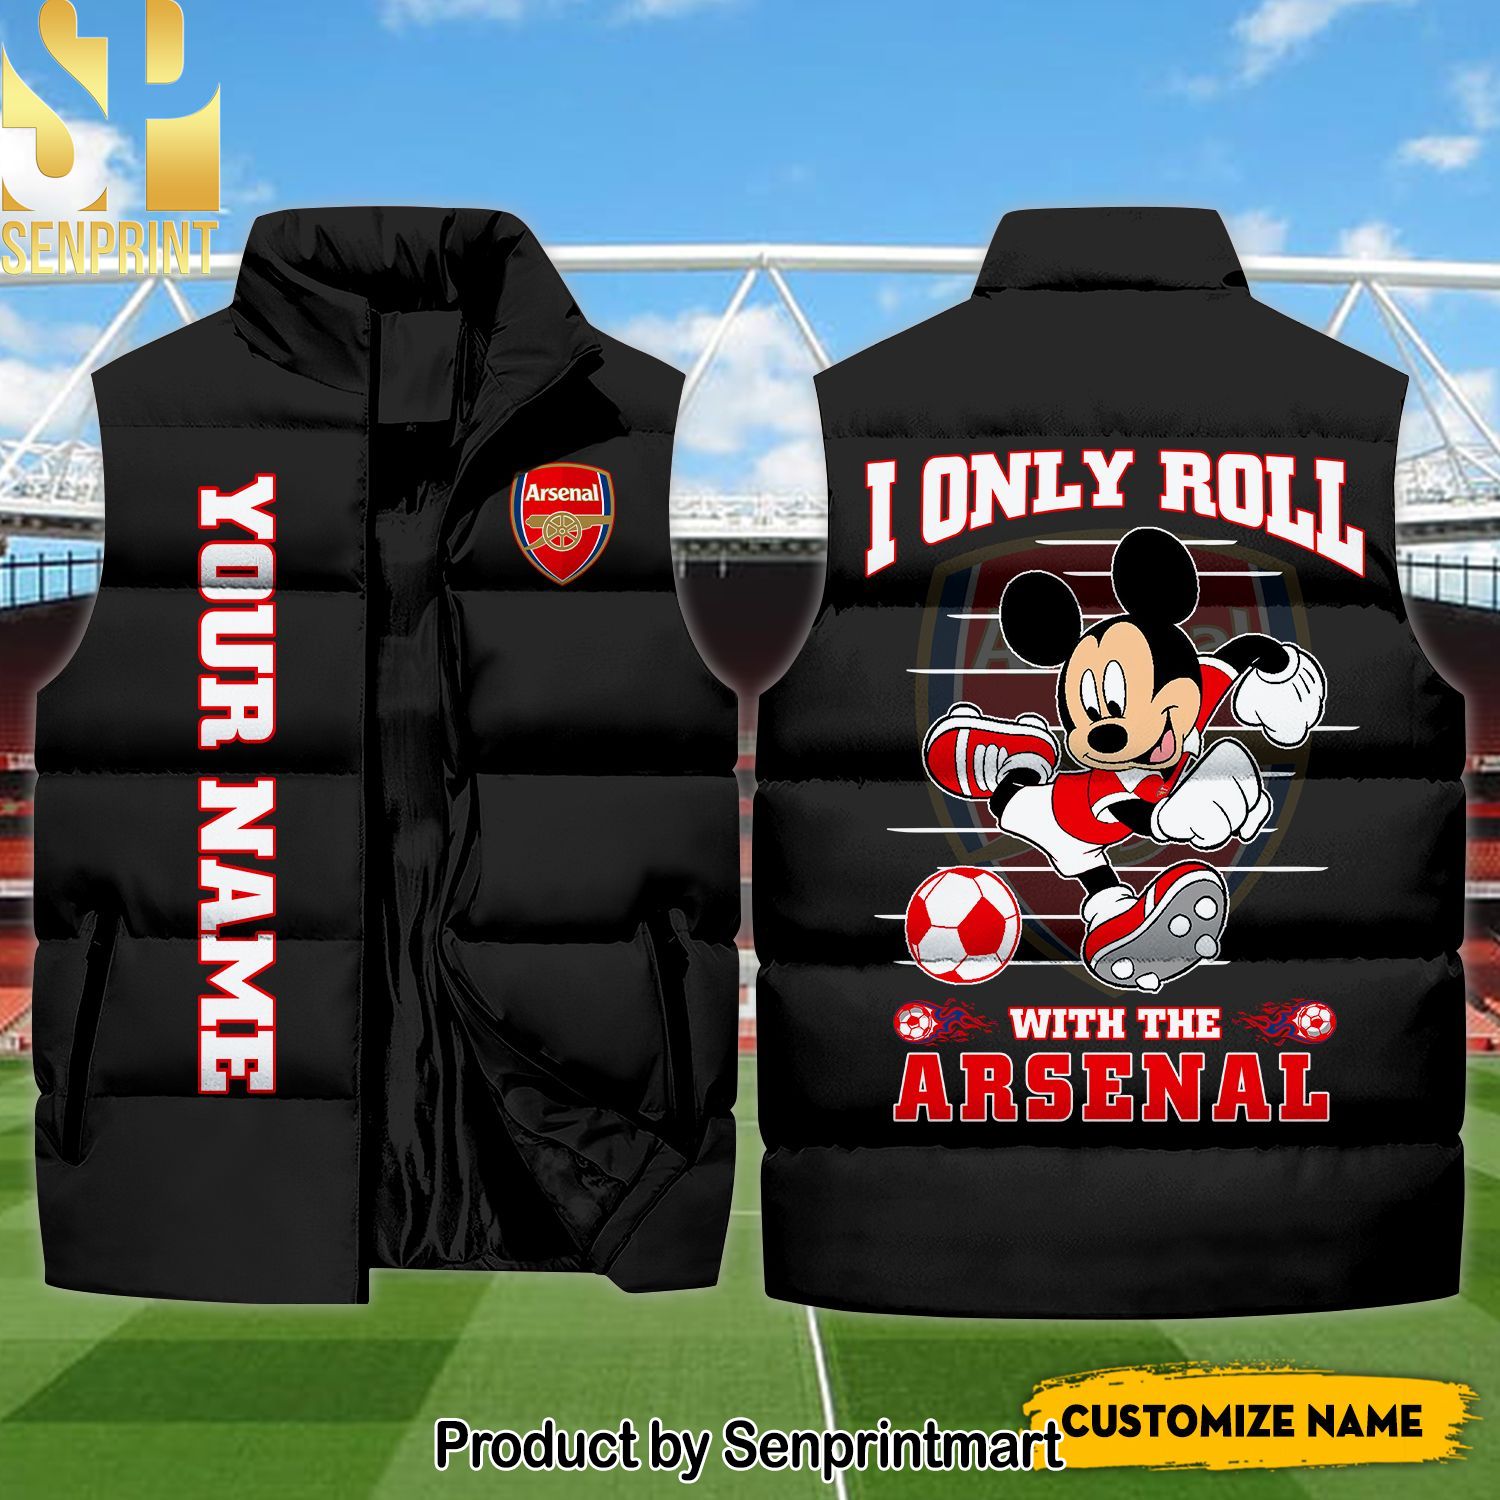 English Premier League I Only Roll With The Arsenal Hot Fashion Sleeveless Jacket